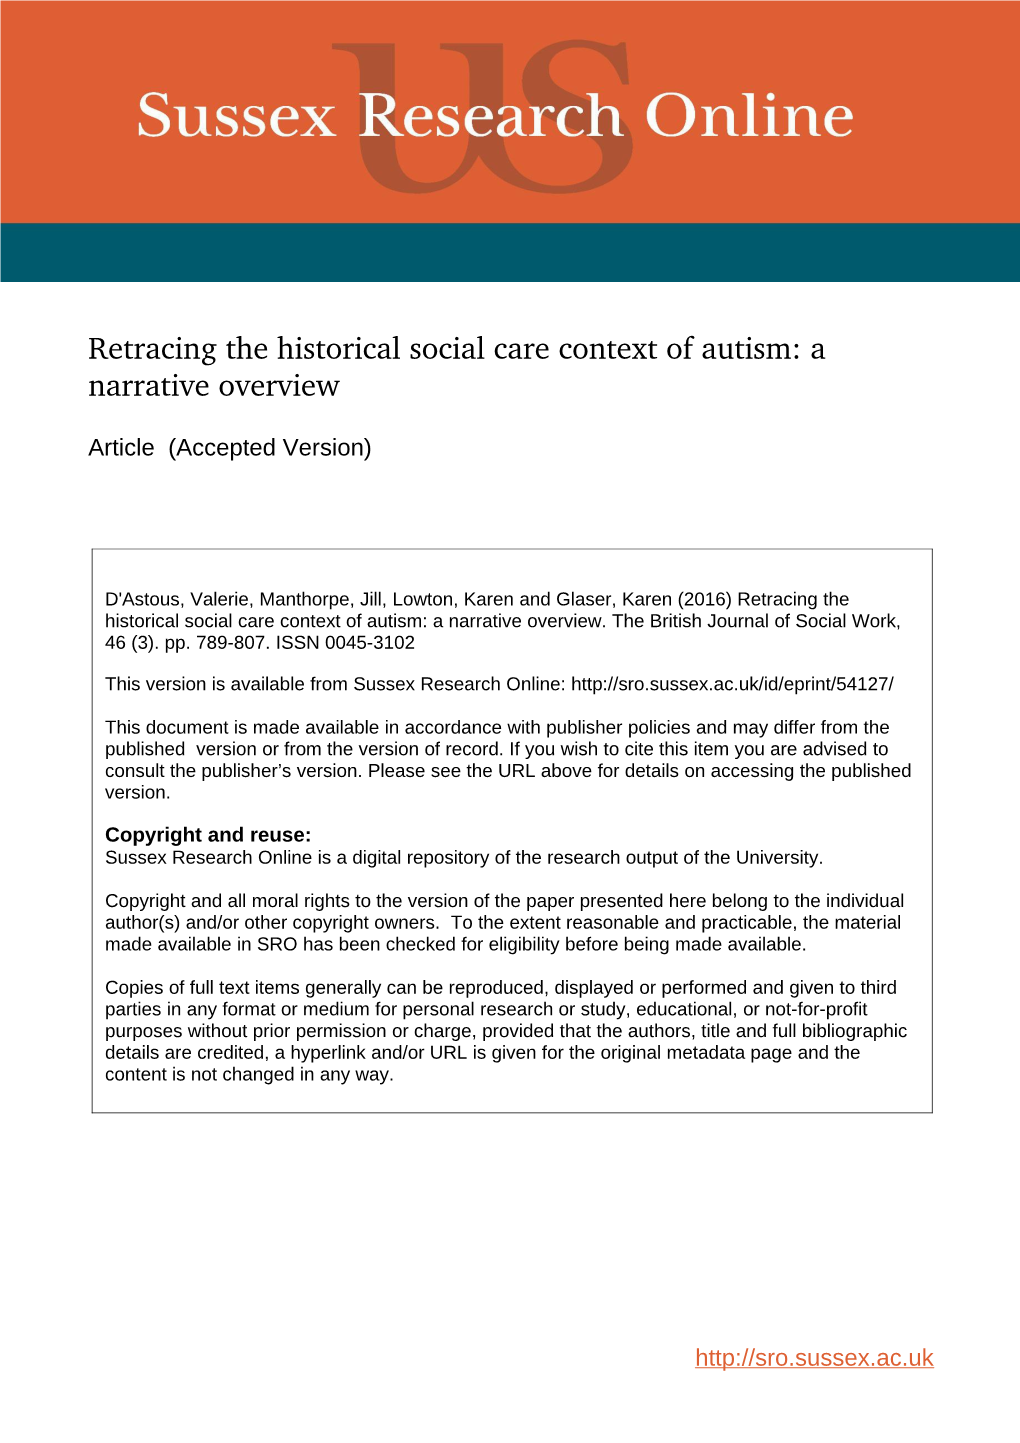 Retracing the Historical Social Care Context of Autism: a Narrative Overview